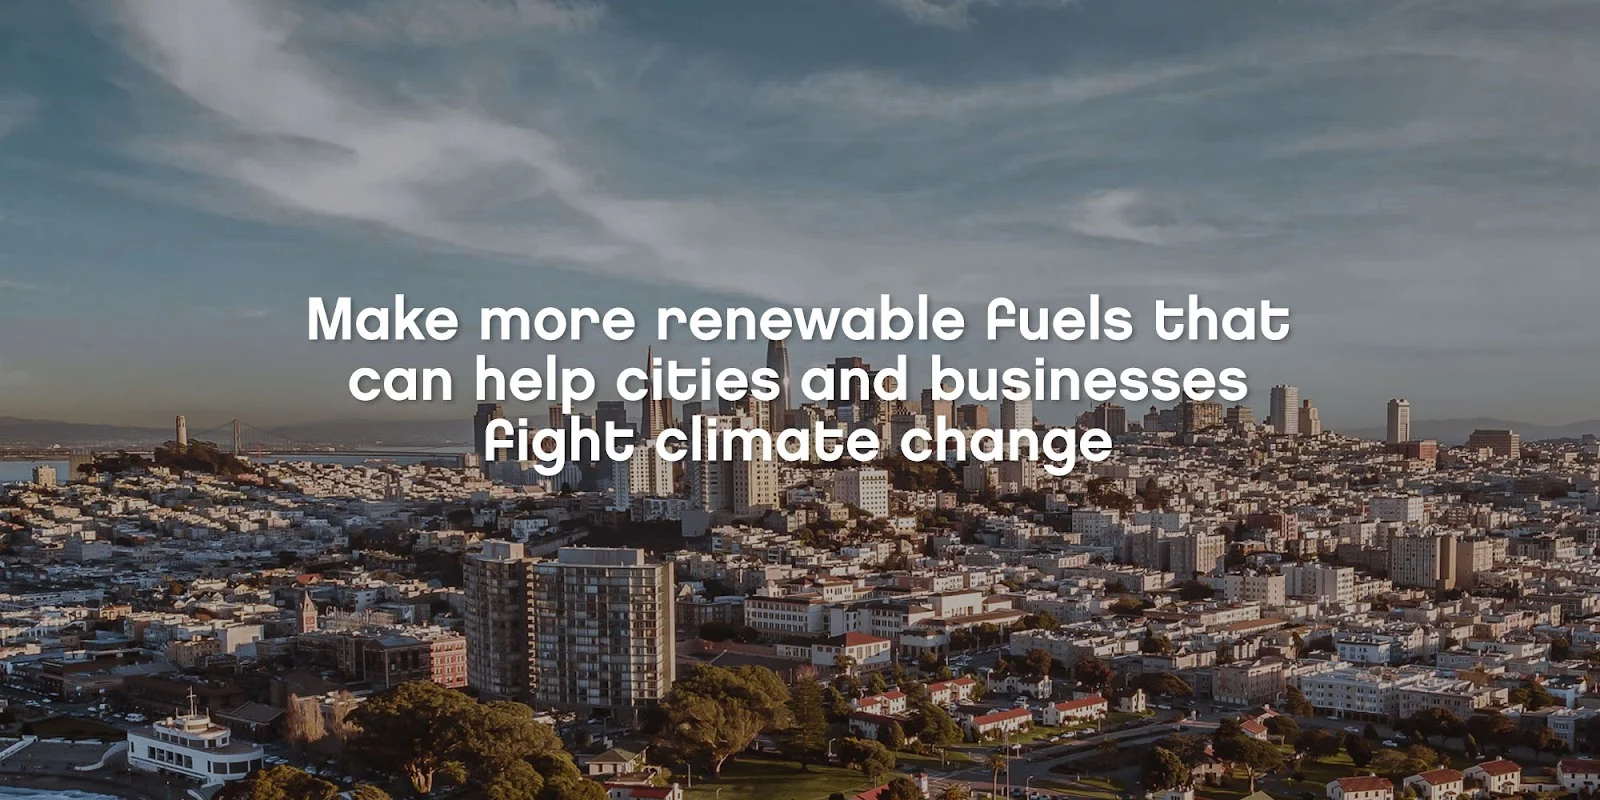 For more than a decade, Neste has been helping businesses and cities in California achieve their climate goals faster